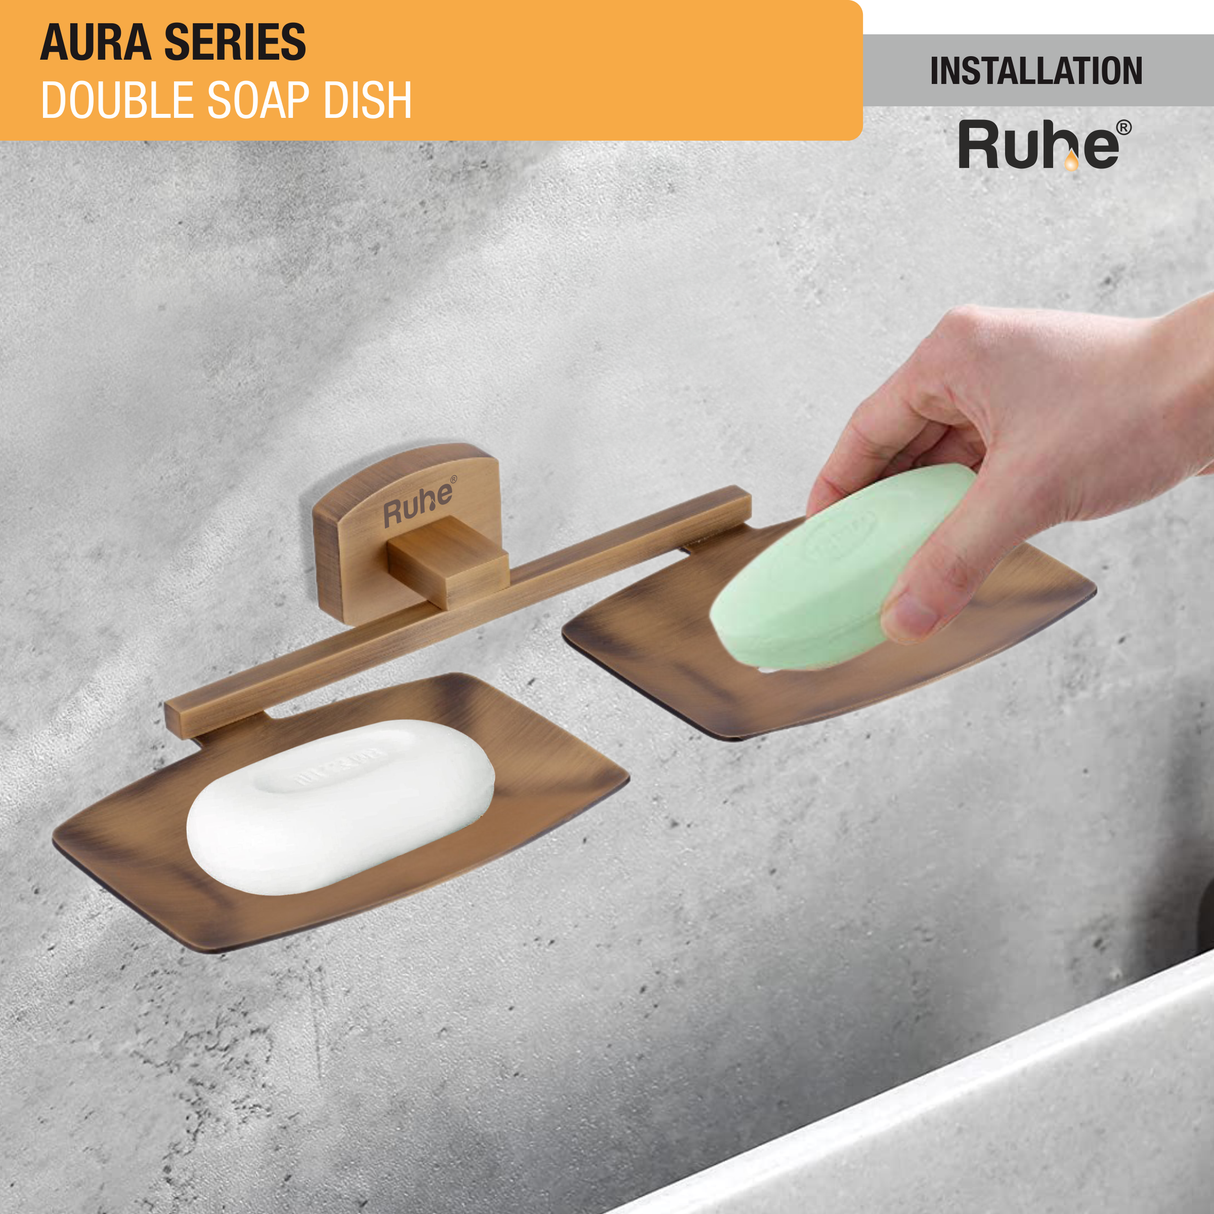 Aura Brass Double Soap Dish installed